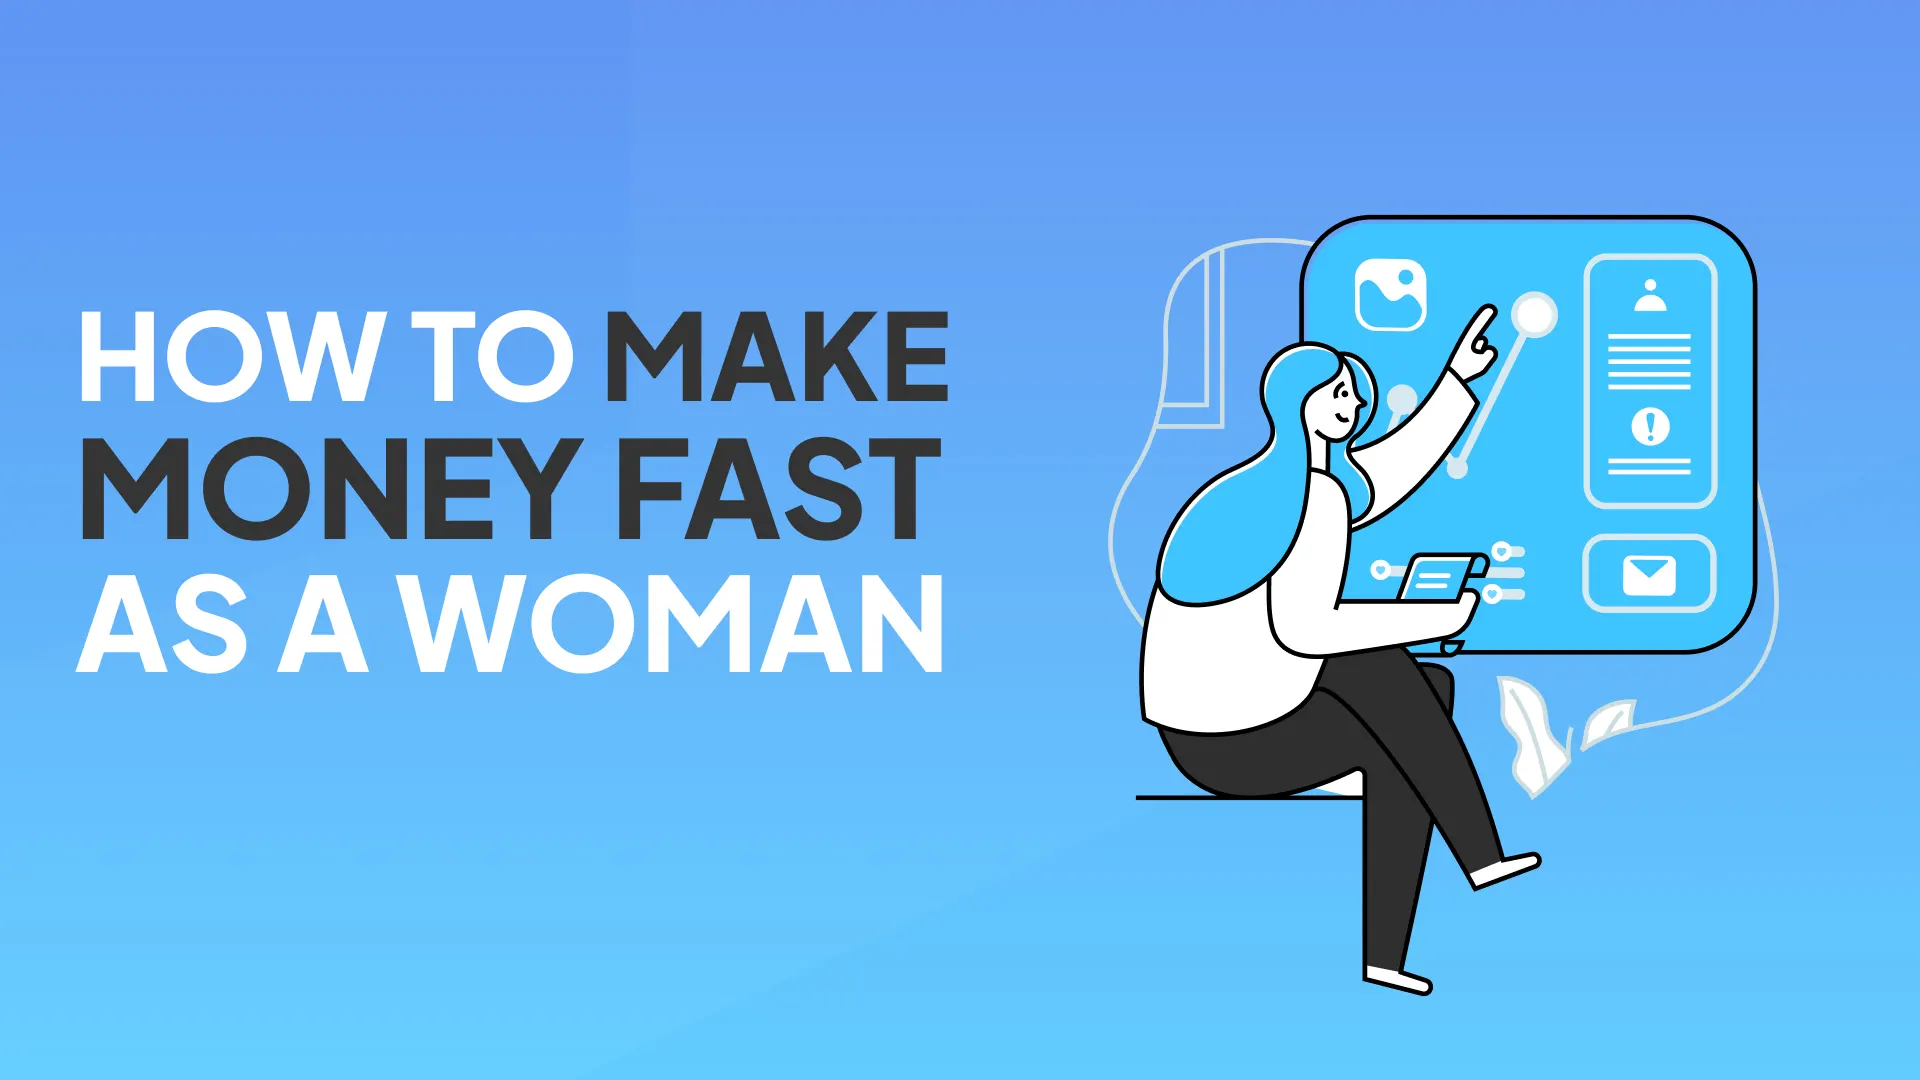 How To Make Money From Home As A Woman